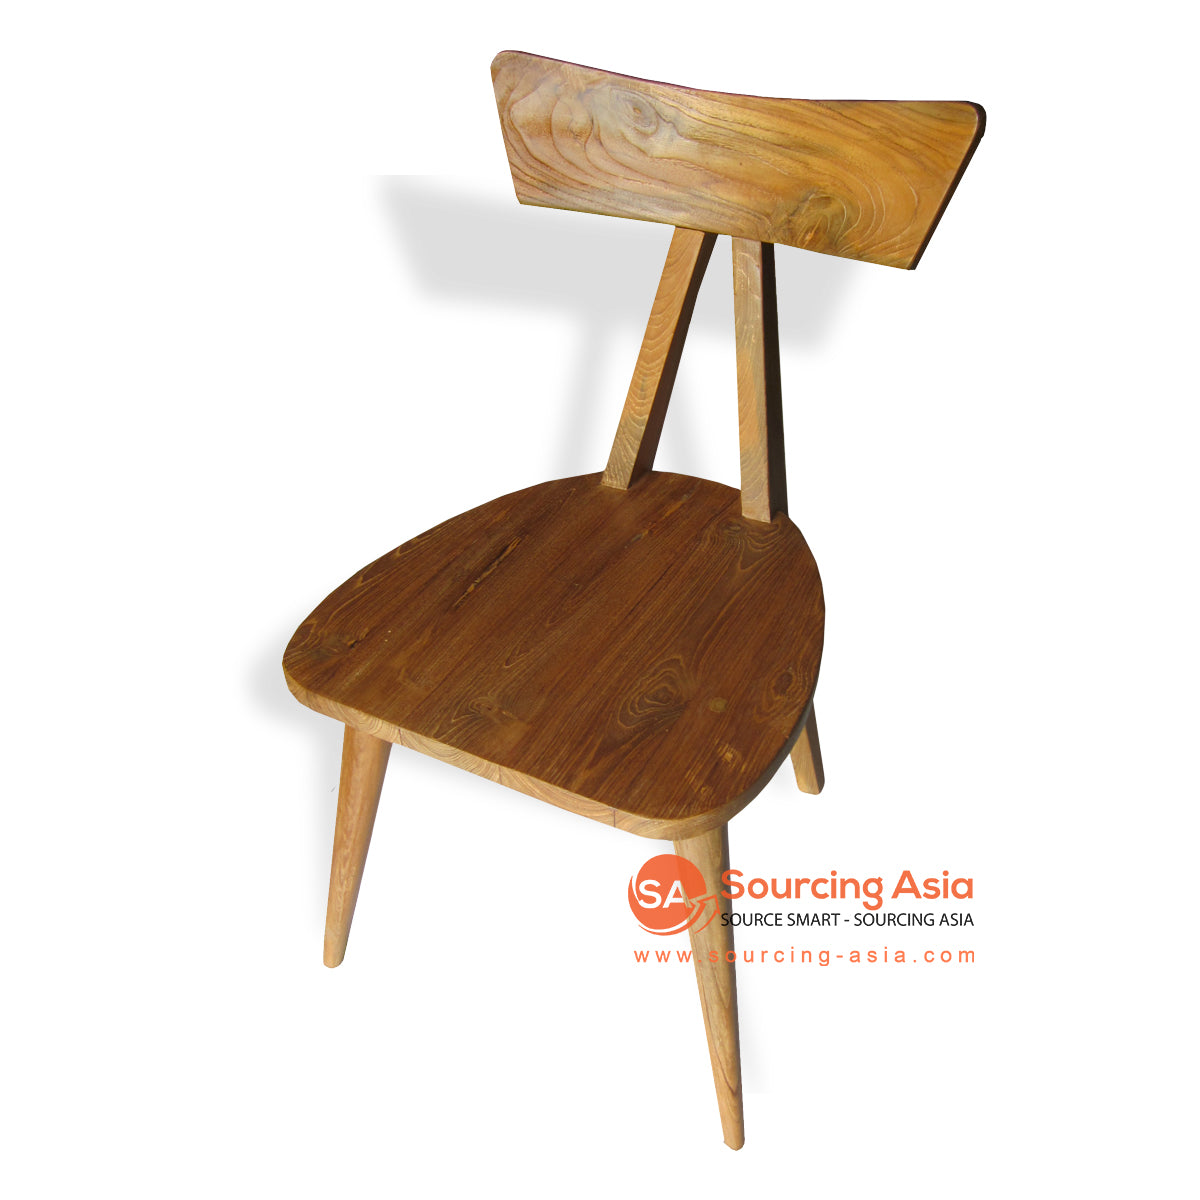 WK250 NATURAL RECYCLED BOAT WOOD BUTTERFLY DINING CHAIR